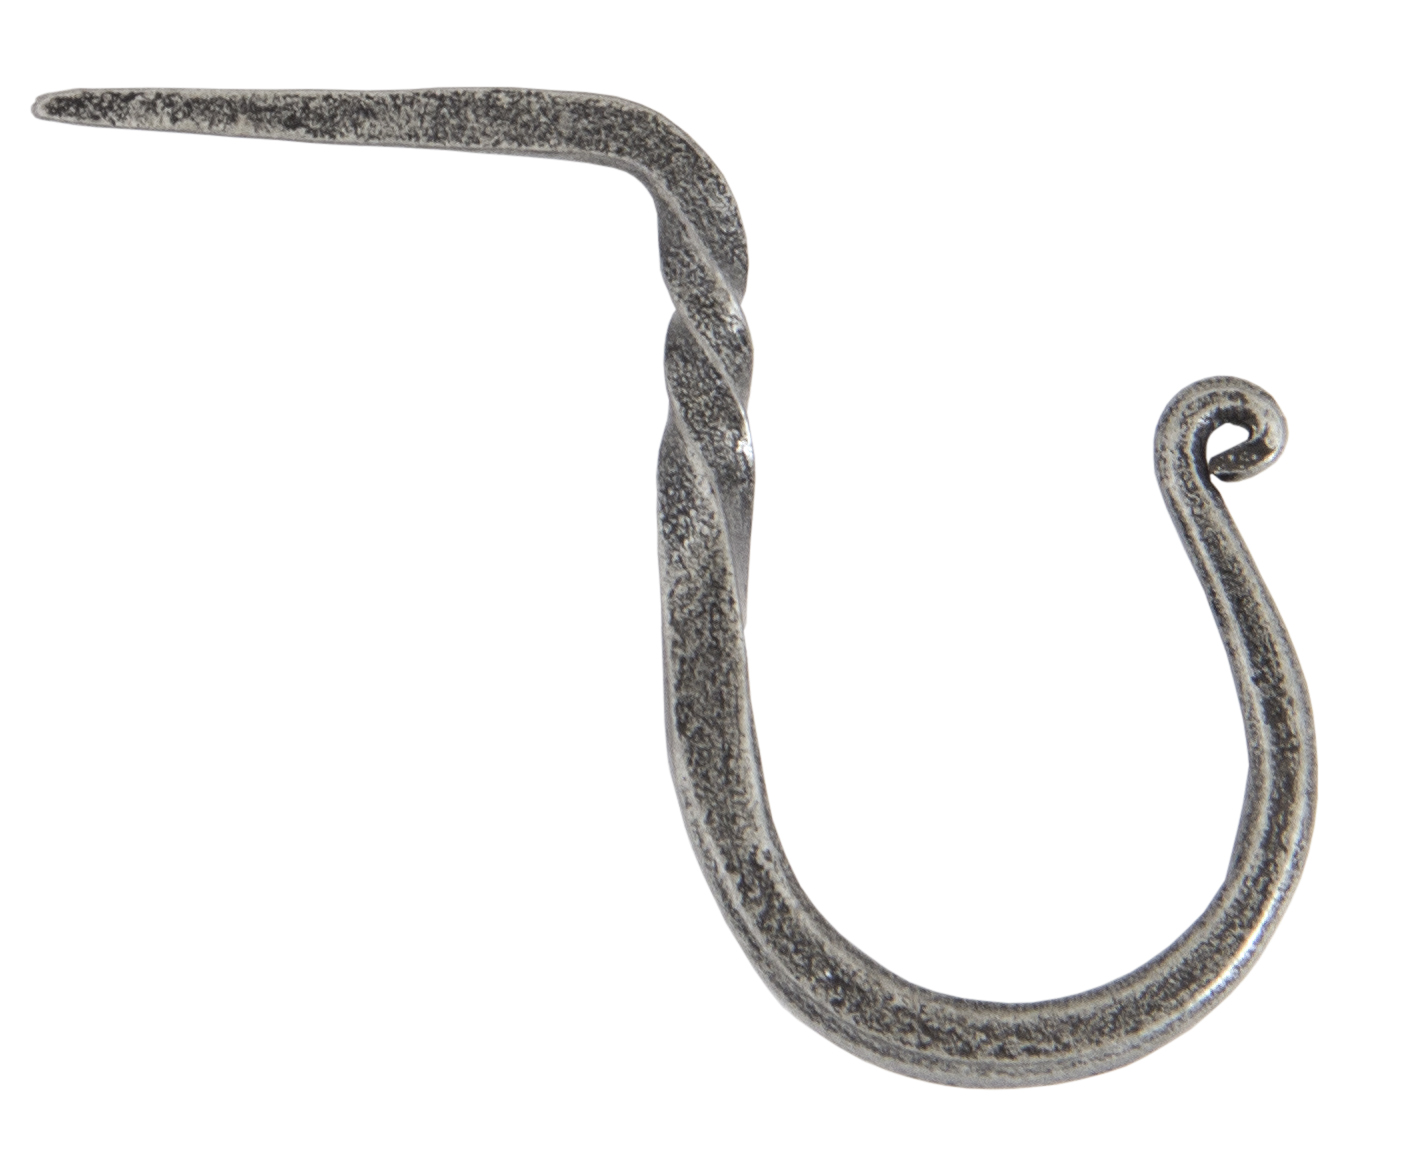 Cup Hook - Small